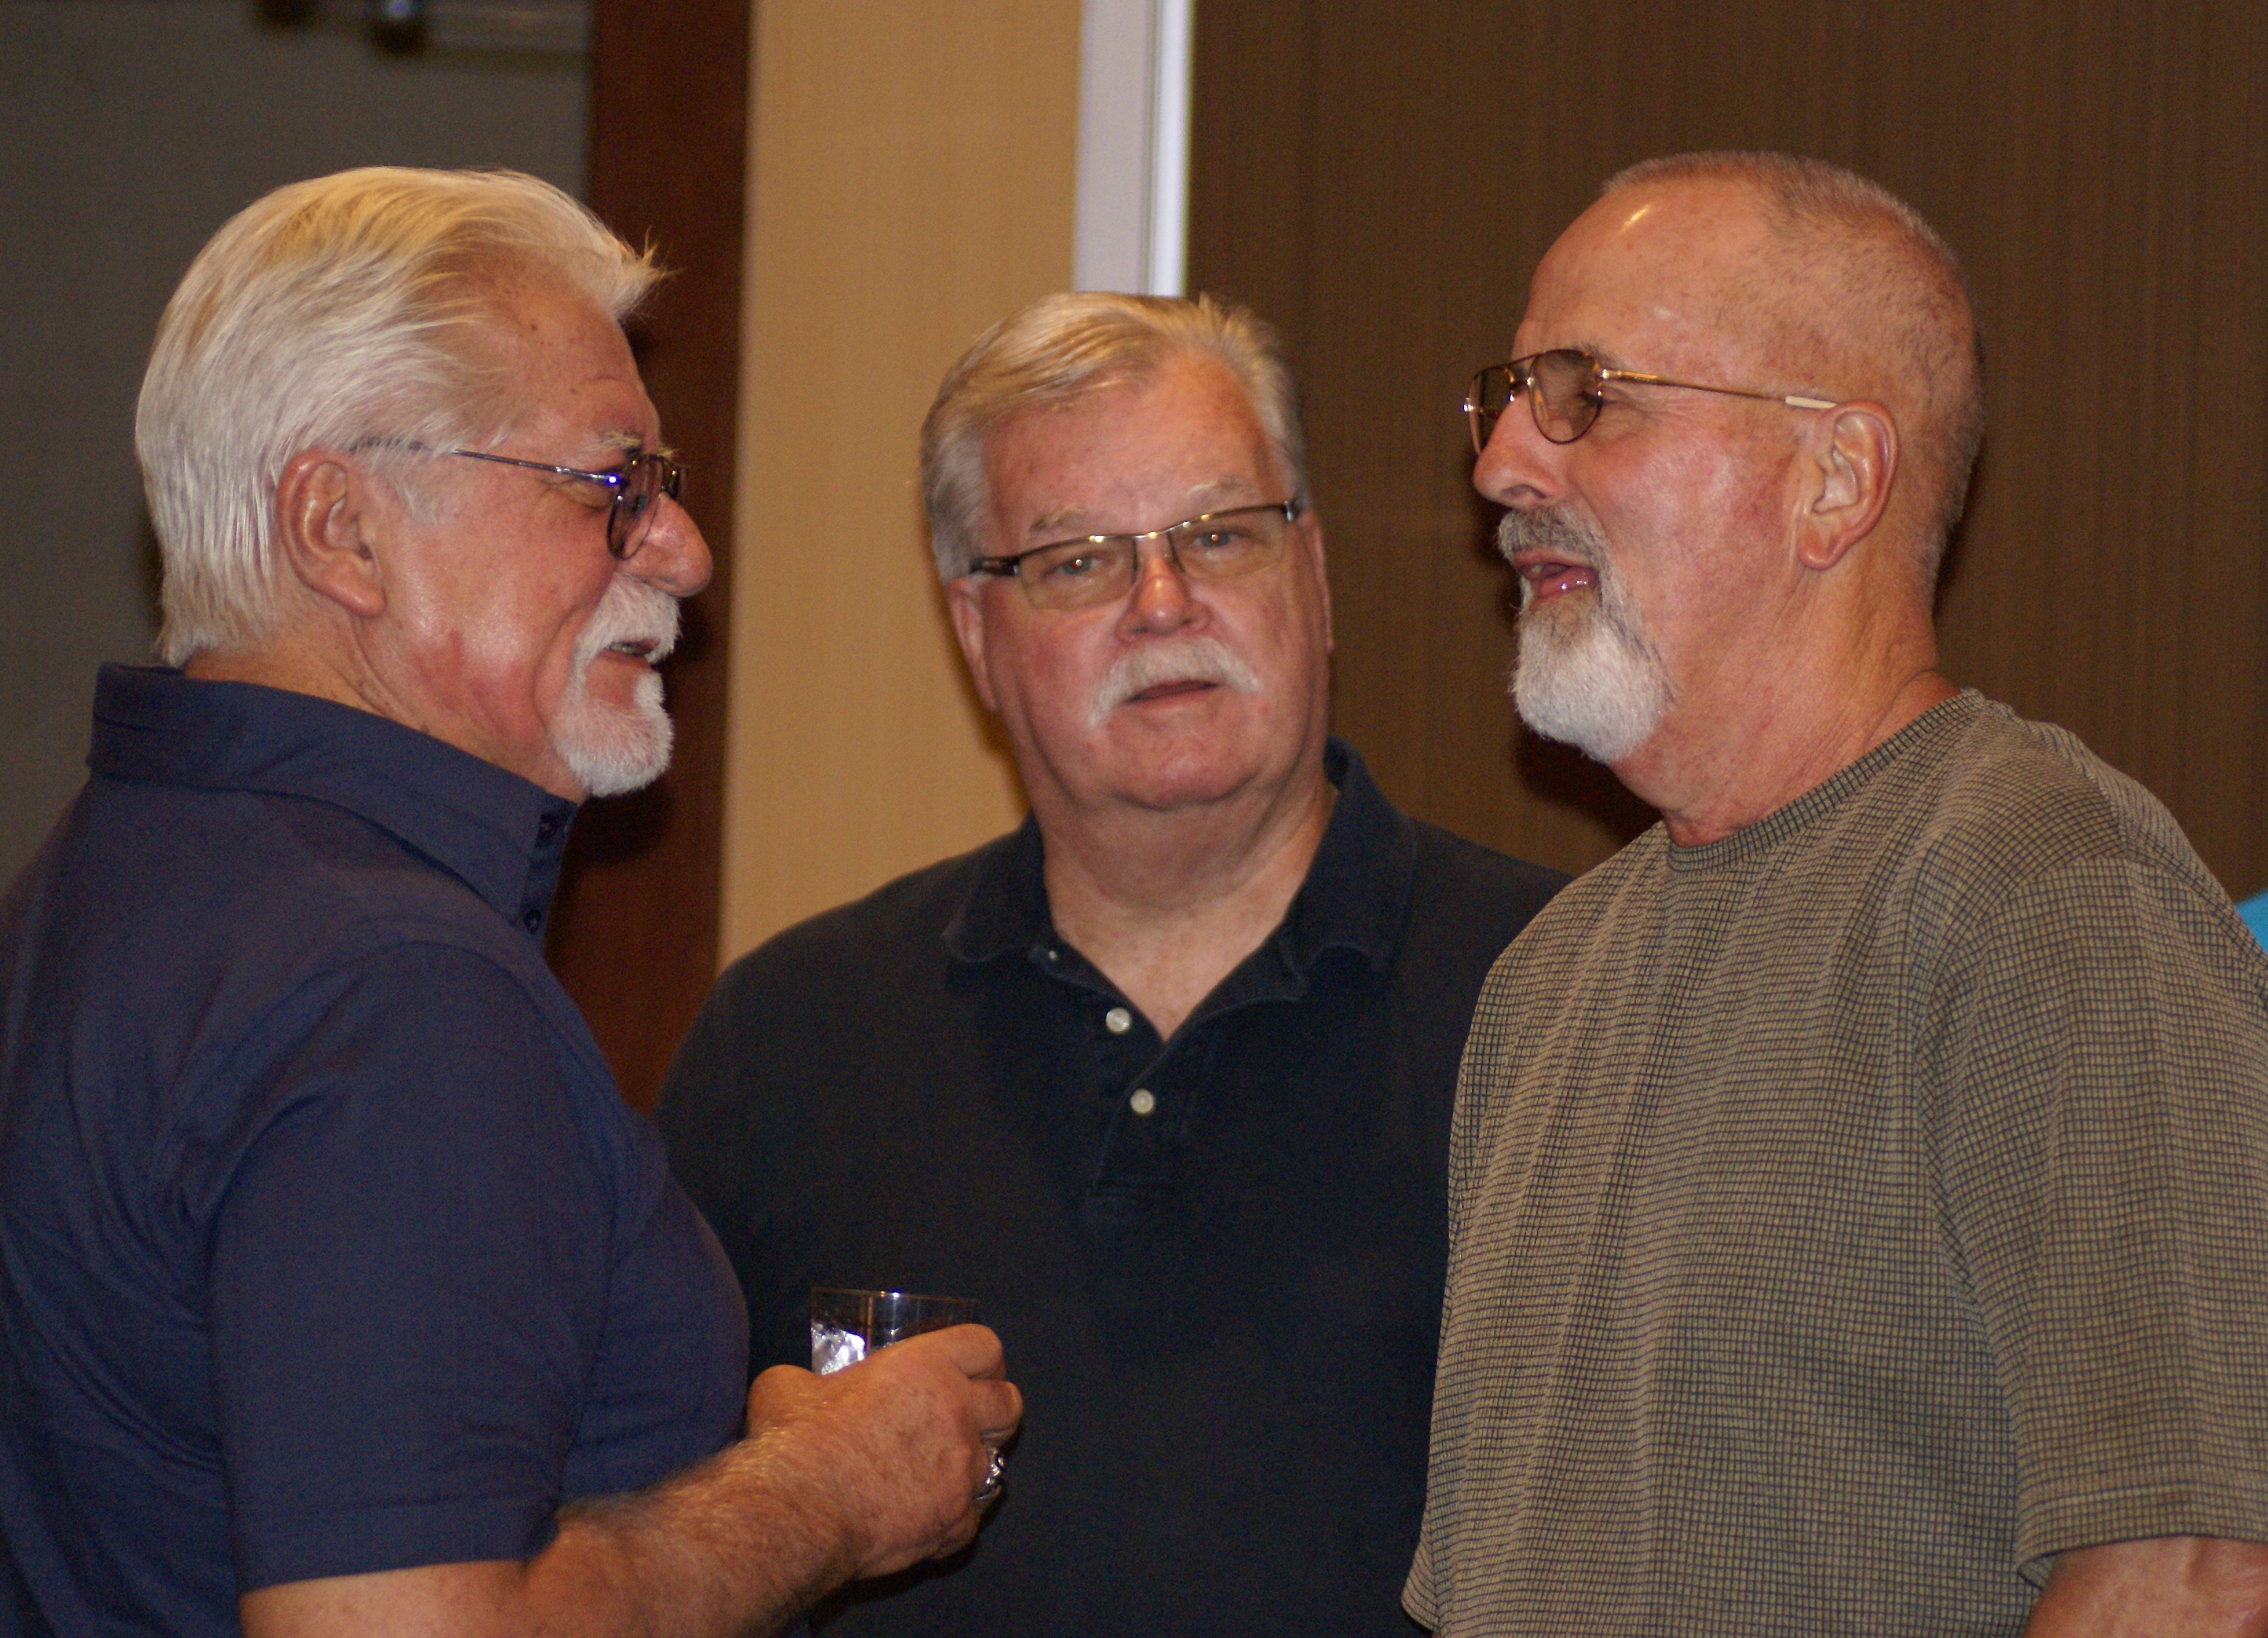 Mike Baer, Dan Hecker and Larry Grossnickle